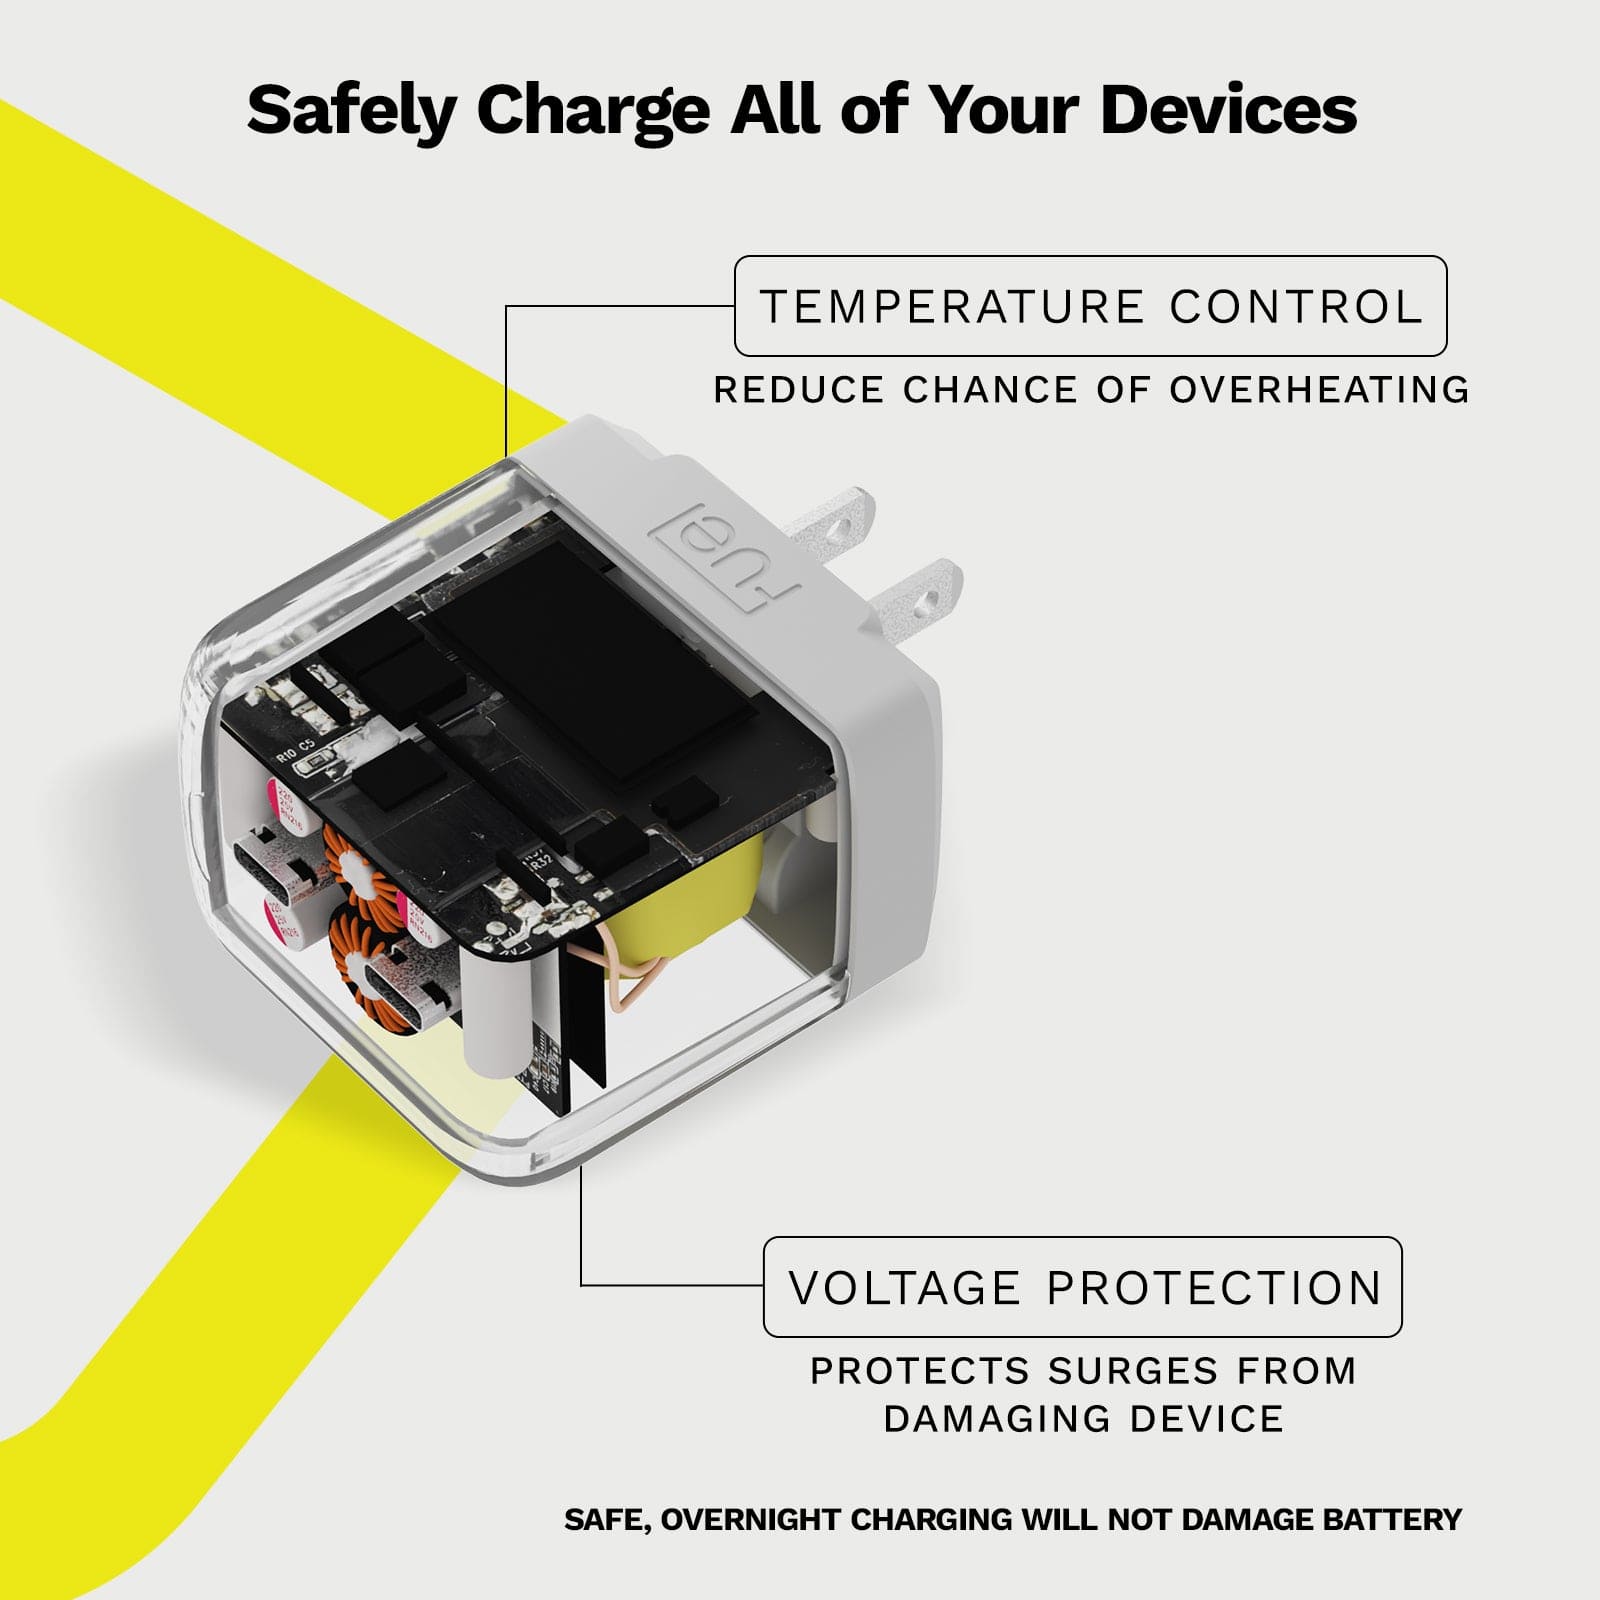 Safely charge all of your devices. temperature control - reduce chance of overheating. Voltage protection - protects surges from damaging device